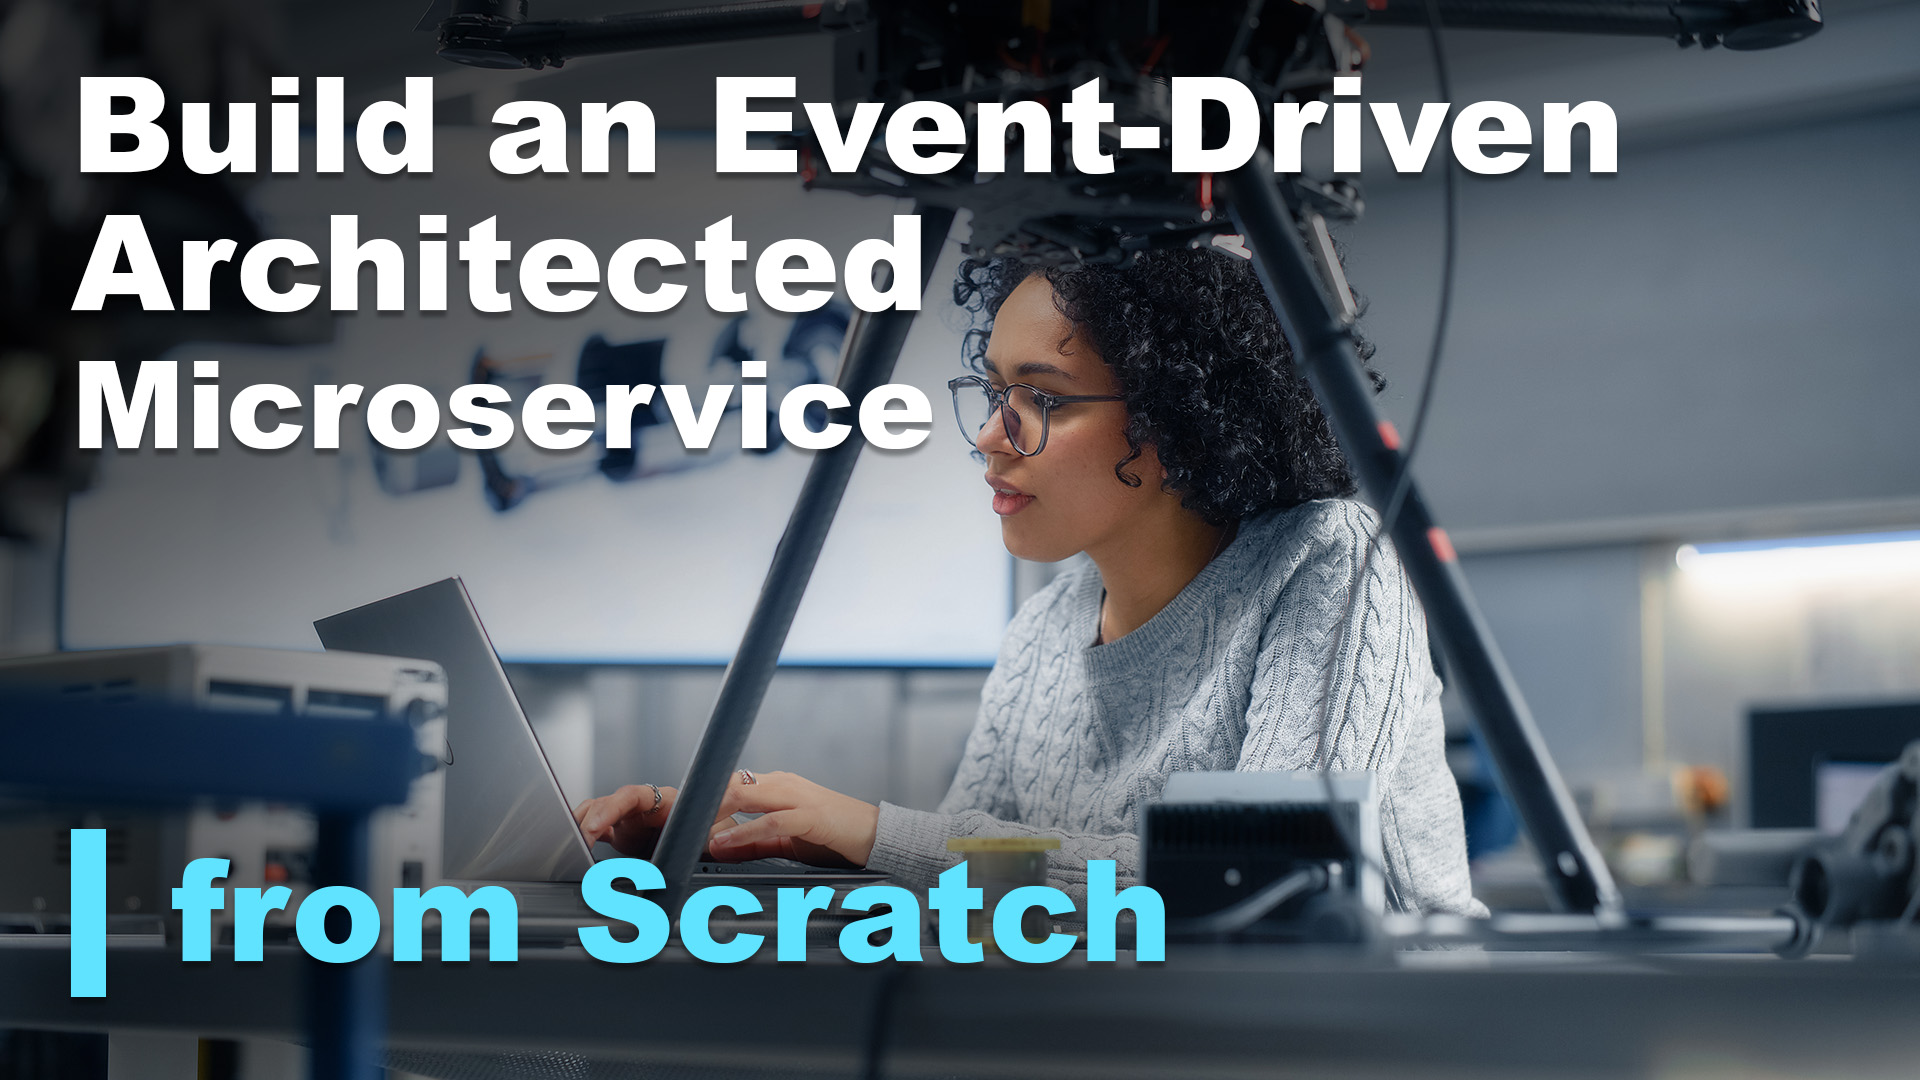 File New: Build an Event-Driven Architected Microservice from Scratch